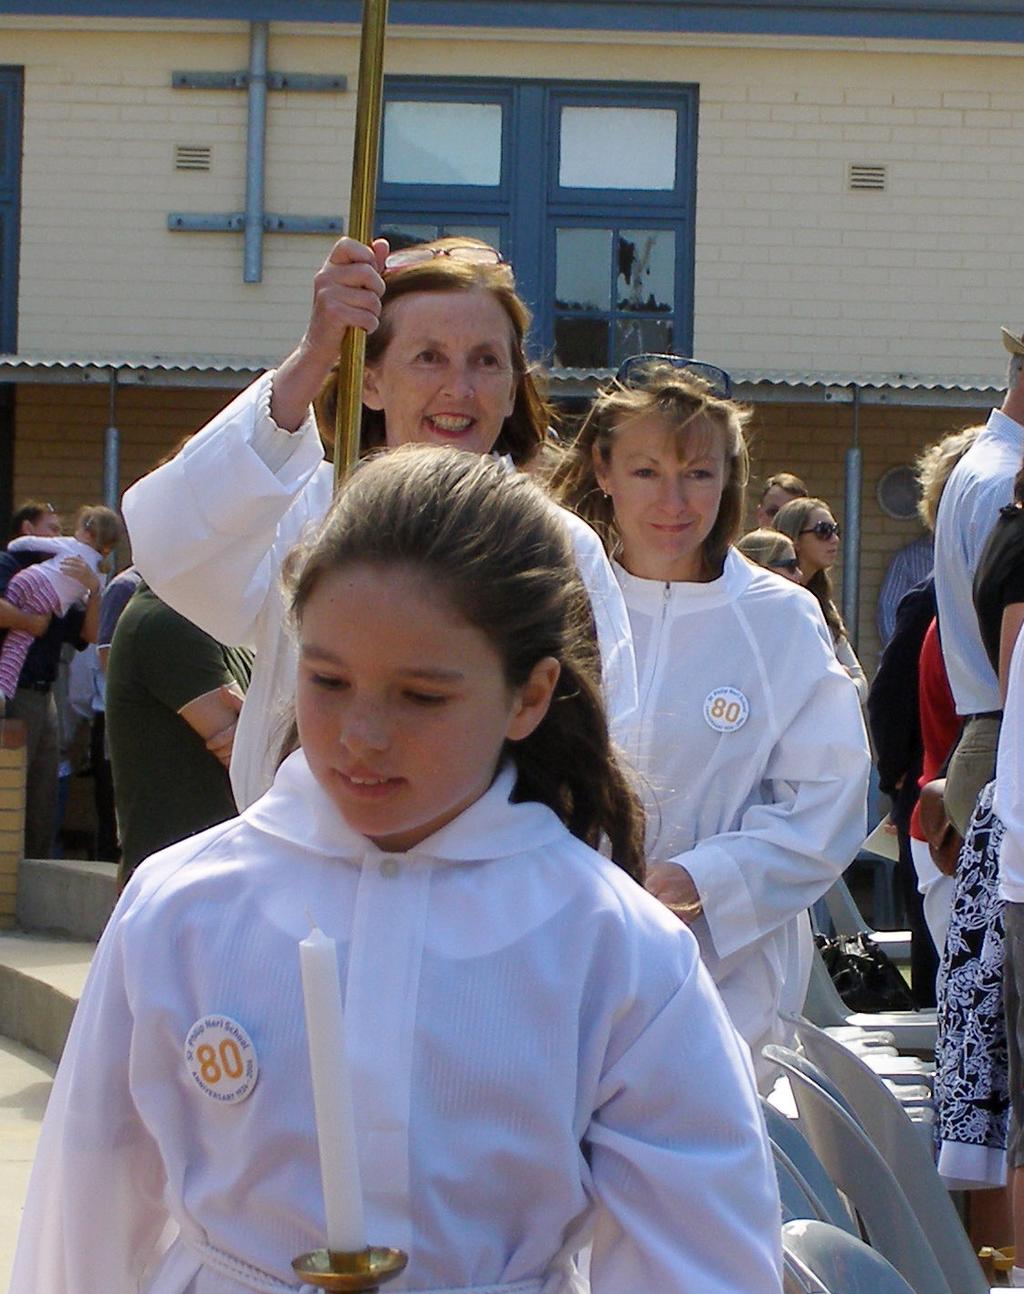 One of the roles for Acolytes would be to assist with the distribution of Holy Communion.